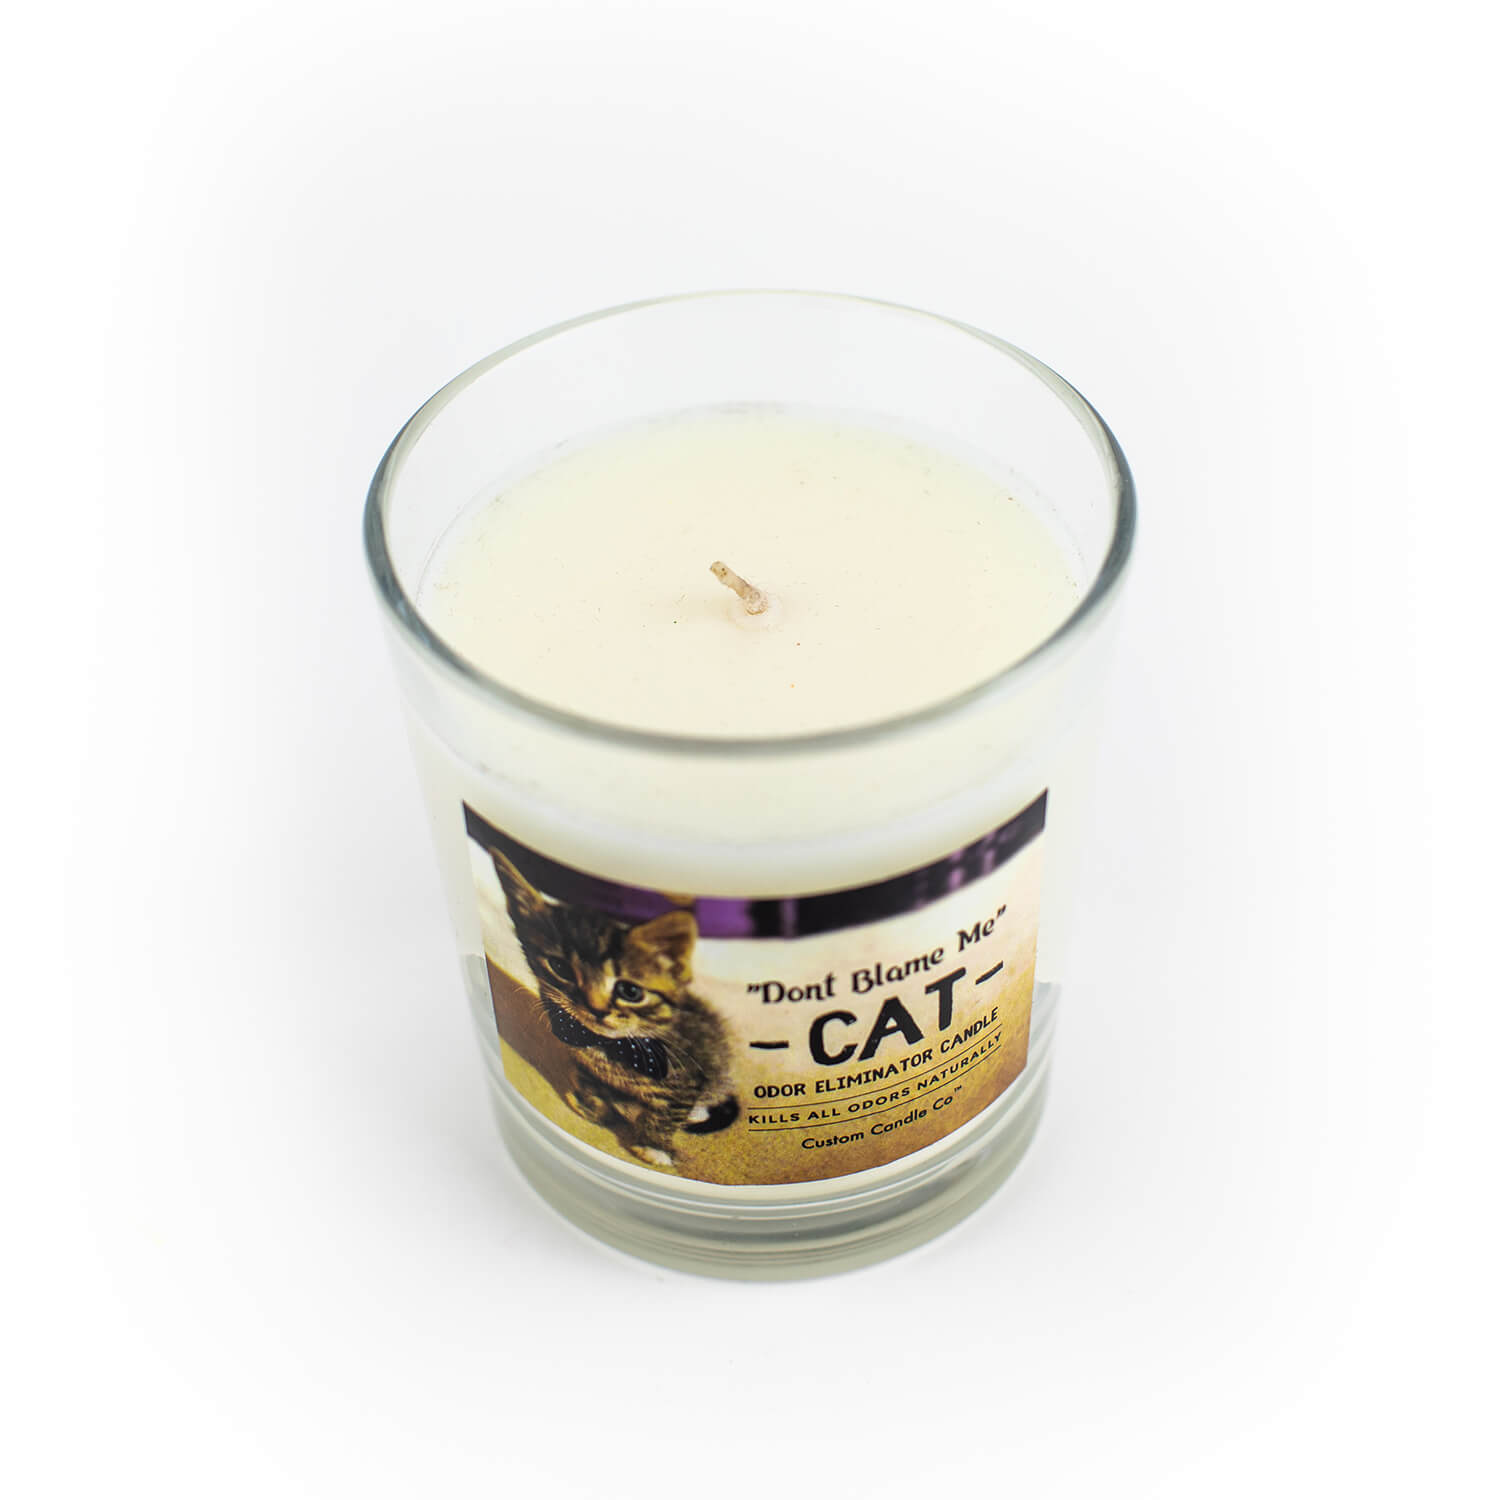 A "Don't Blame Me" Cat Candle Odor Eliminator with a cat on it on a white background.